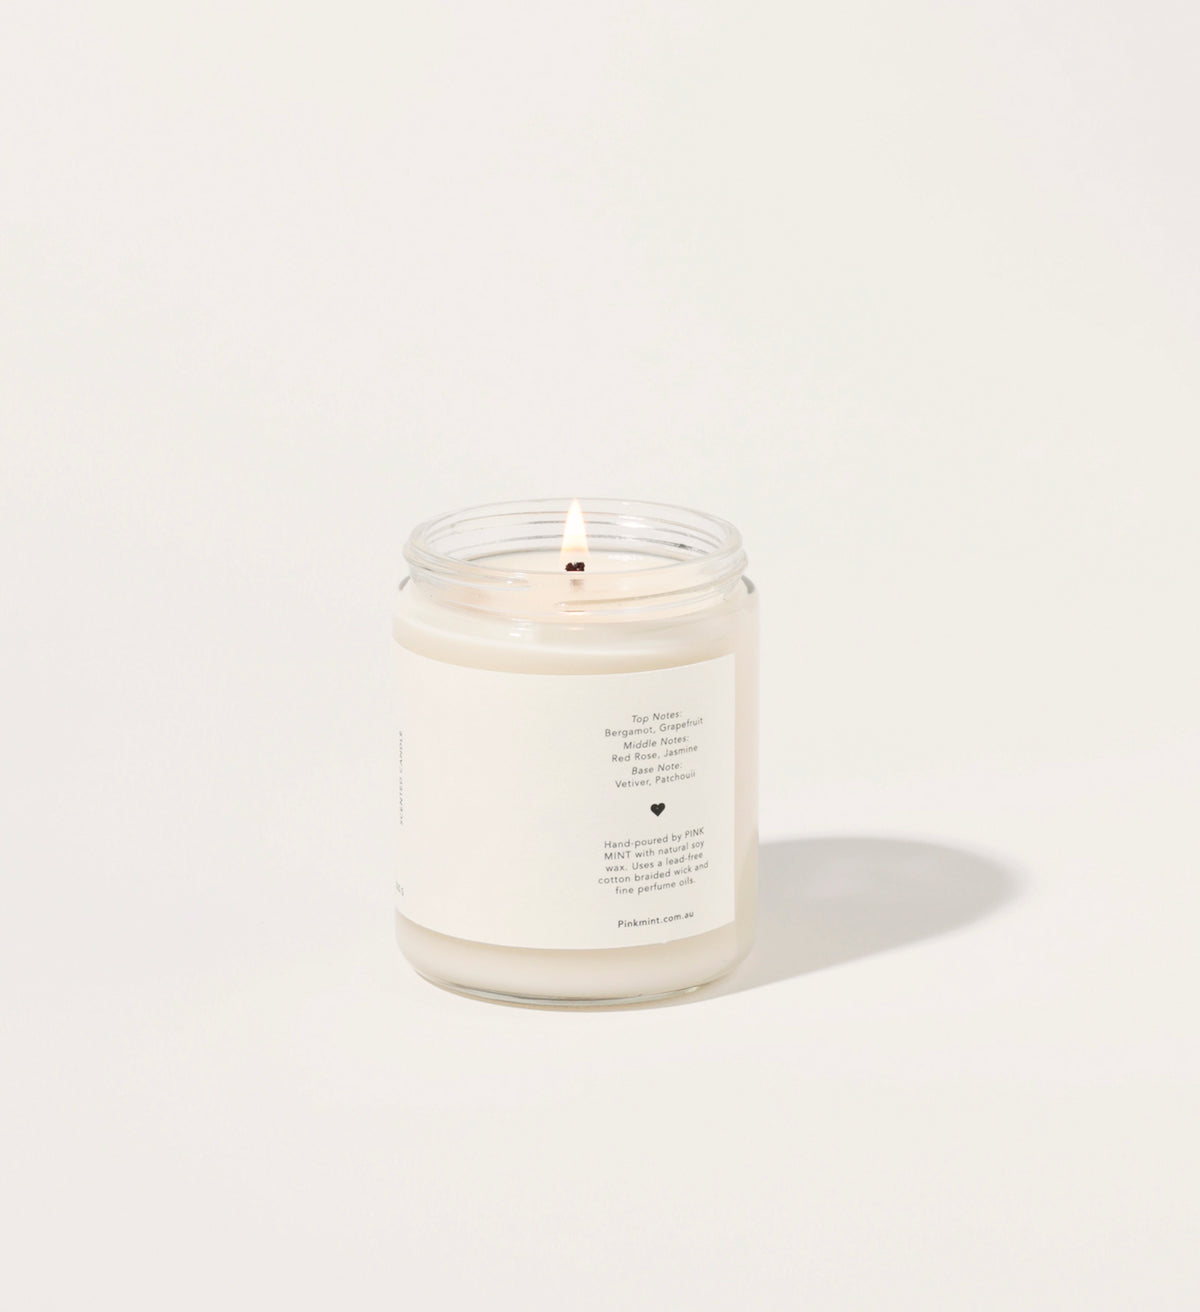 BLUE WHISPER SOY CANDLE